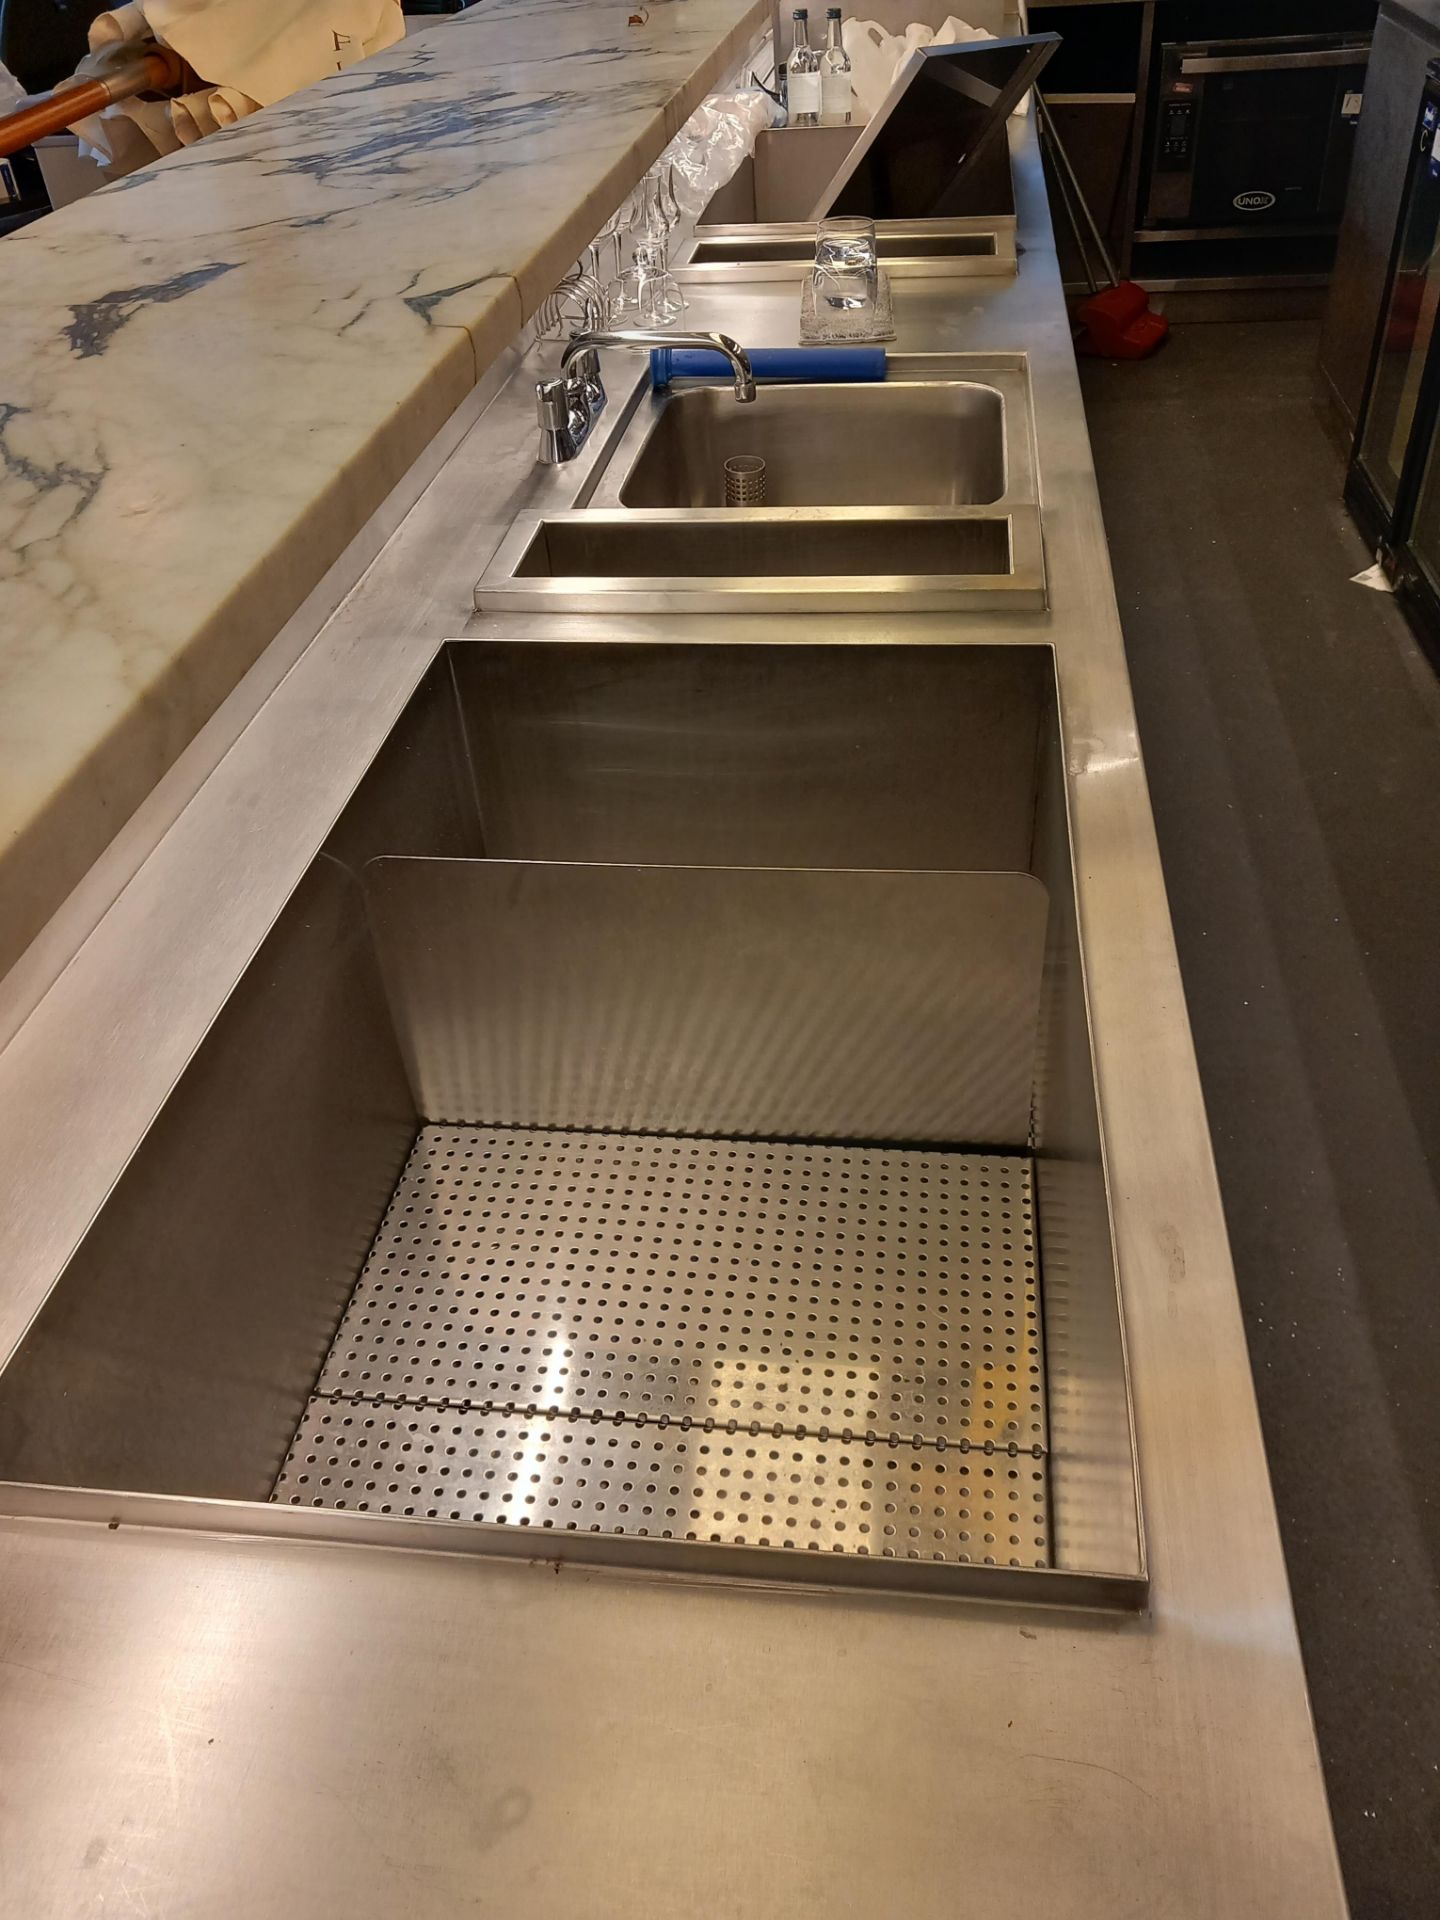 Stainless steel ‘L’ shaped bar unit approx. 8000mm - Image 4 of 21